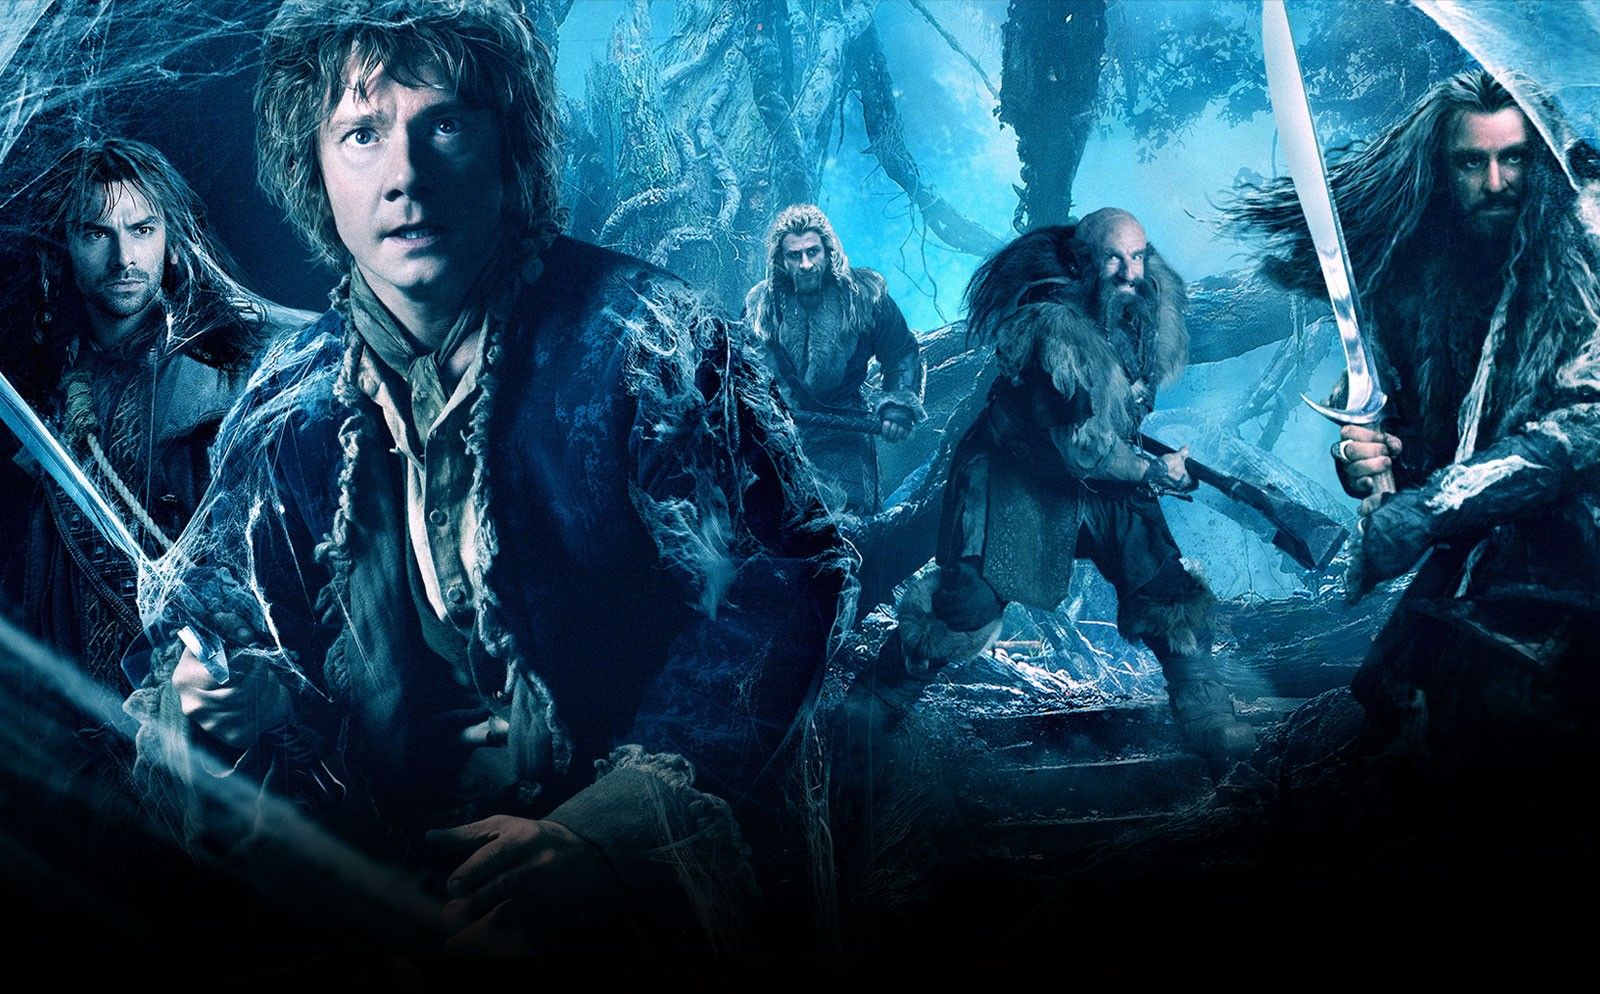 download the new version for ipod The Hobbit: The Desolation of Smaug